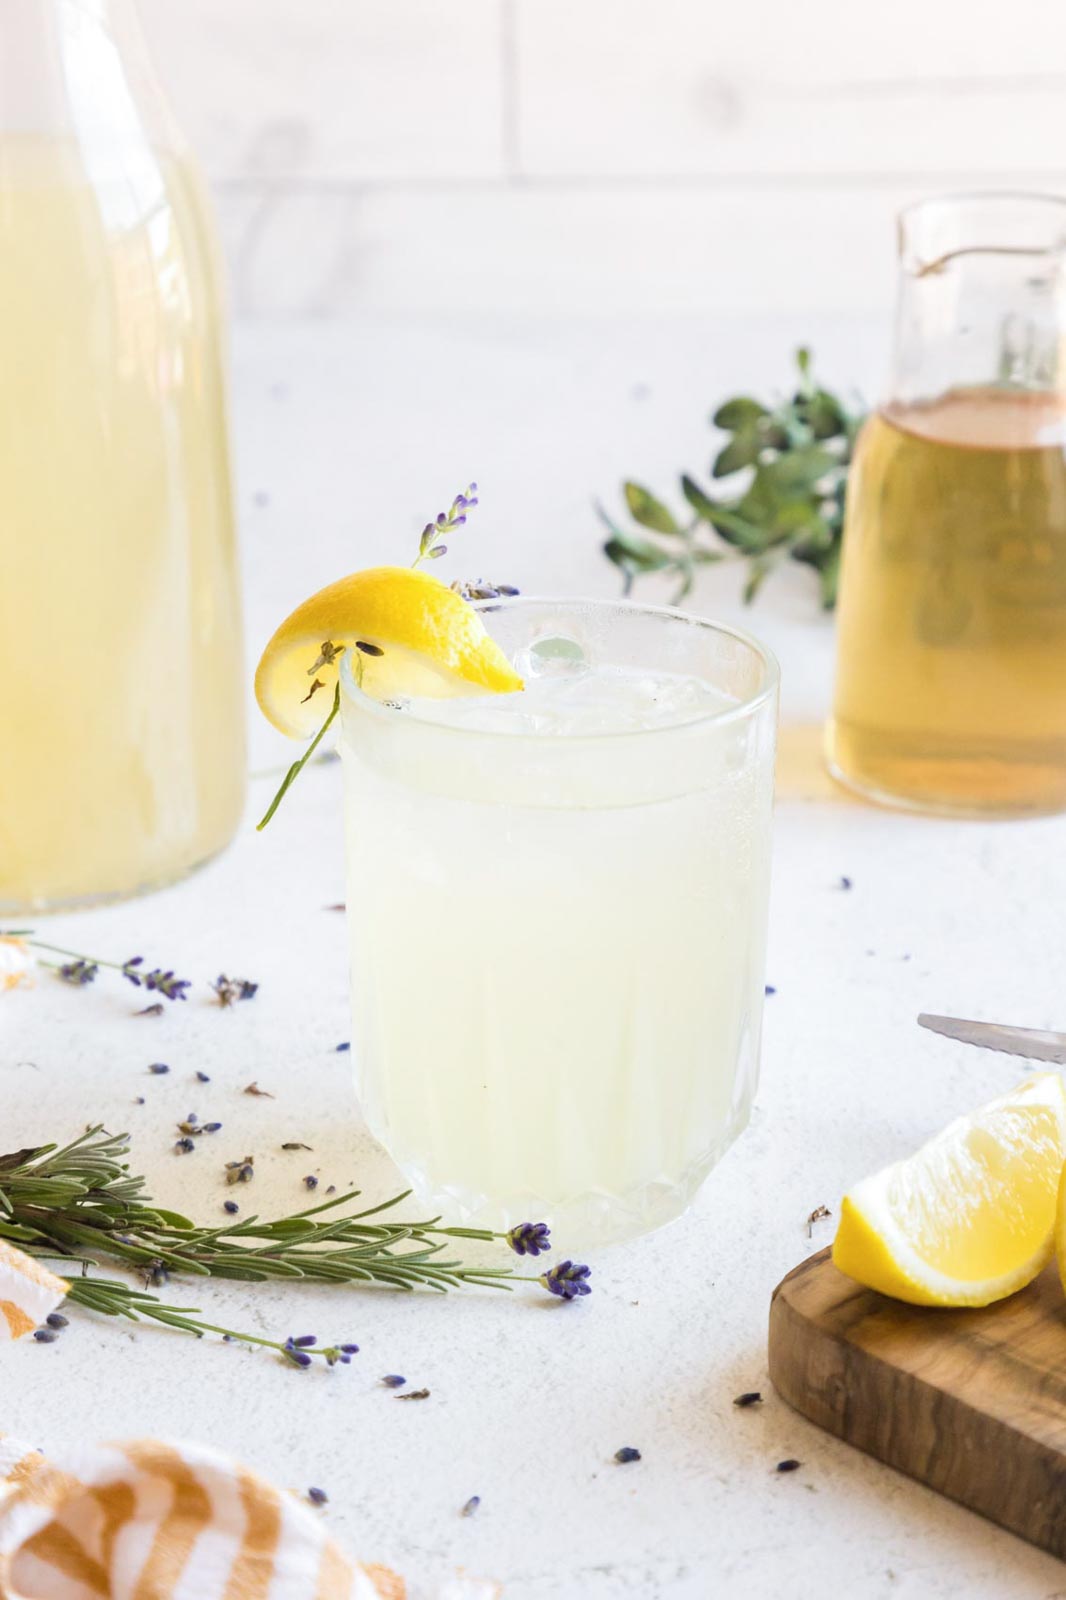 Iced lavender lemonade in a glass garnished with fresh lavender and a lemon wedge.